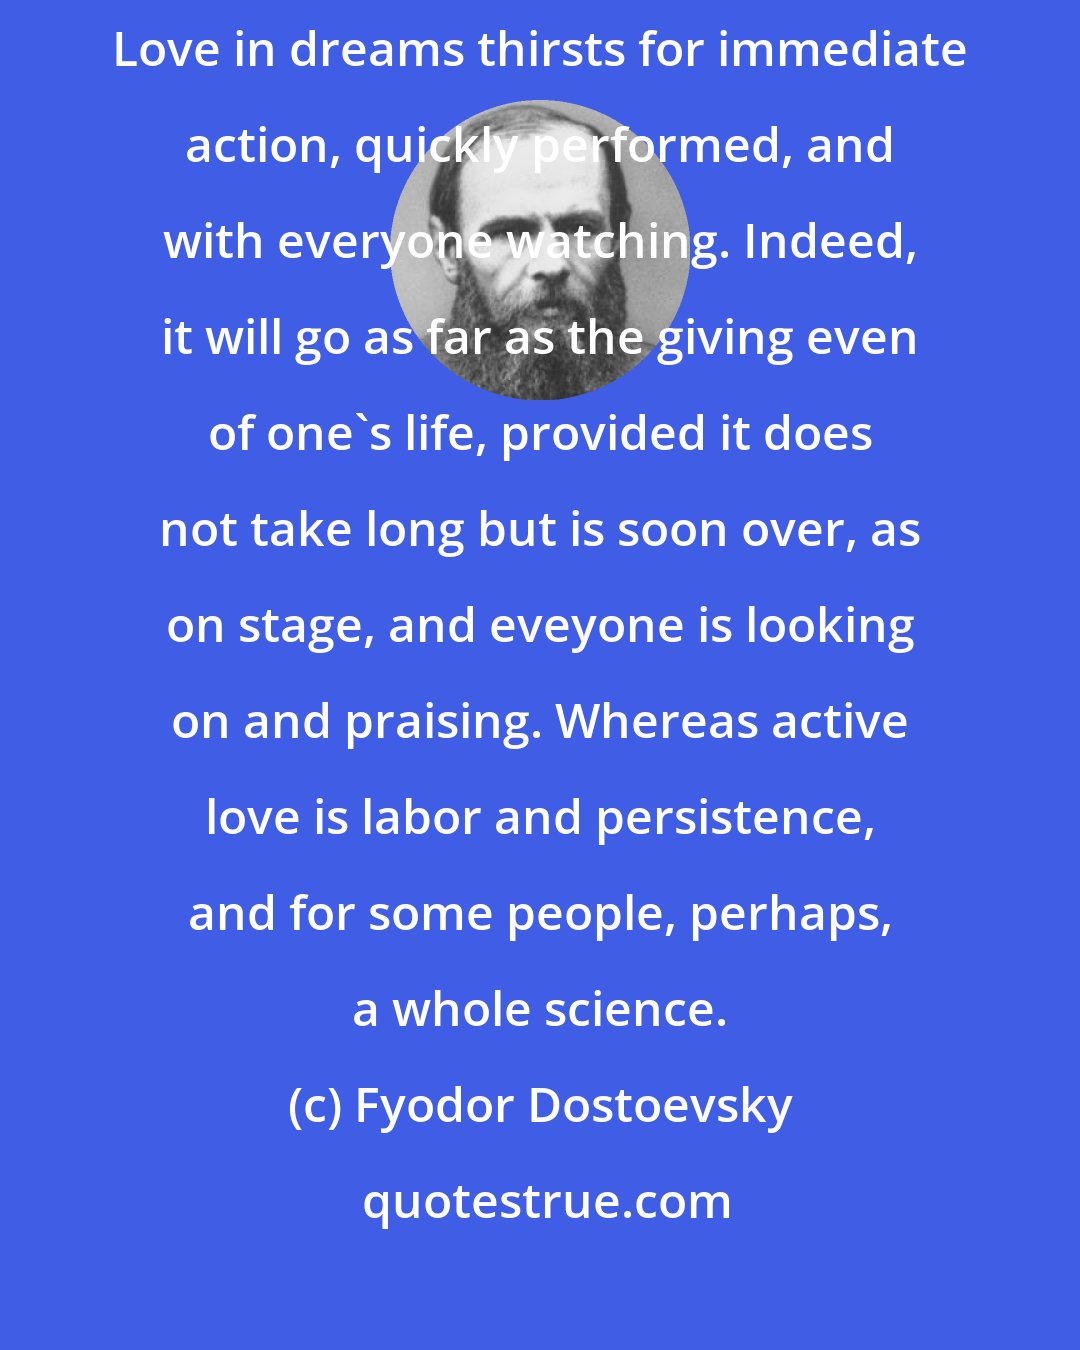 Fyodor Dostoevsky: ... active love is a harsh and fearful thing compared with the love in dreams. Love in dreams thirsts for immediate action, quickly performed, and with everyone watching. Indeed, it will go as far as the giving even of one's life, provided it does not take long but is soon over, as on stage, and eveyone is looking on and praising. Whereas active love is labor and persistence, and for some people, perhaps, a whole science.